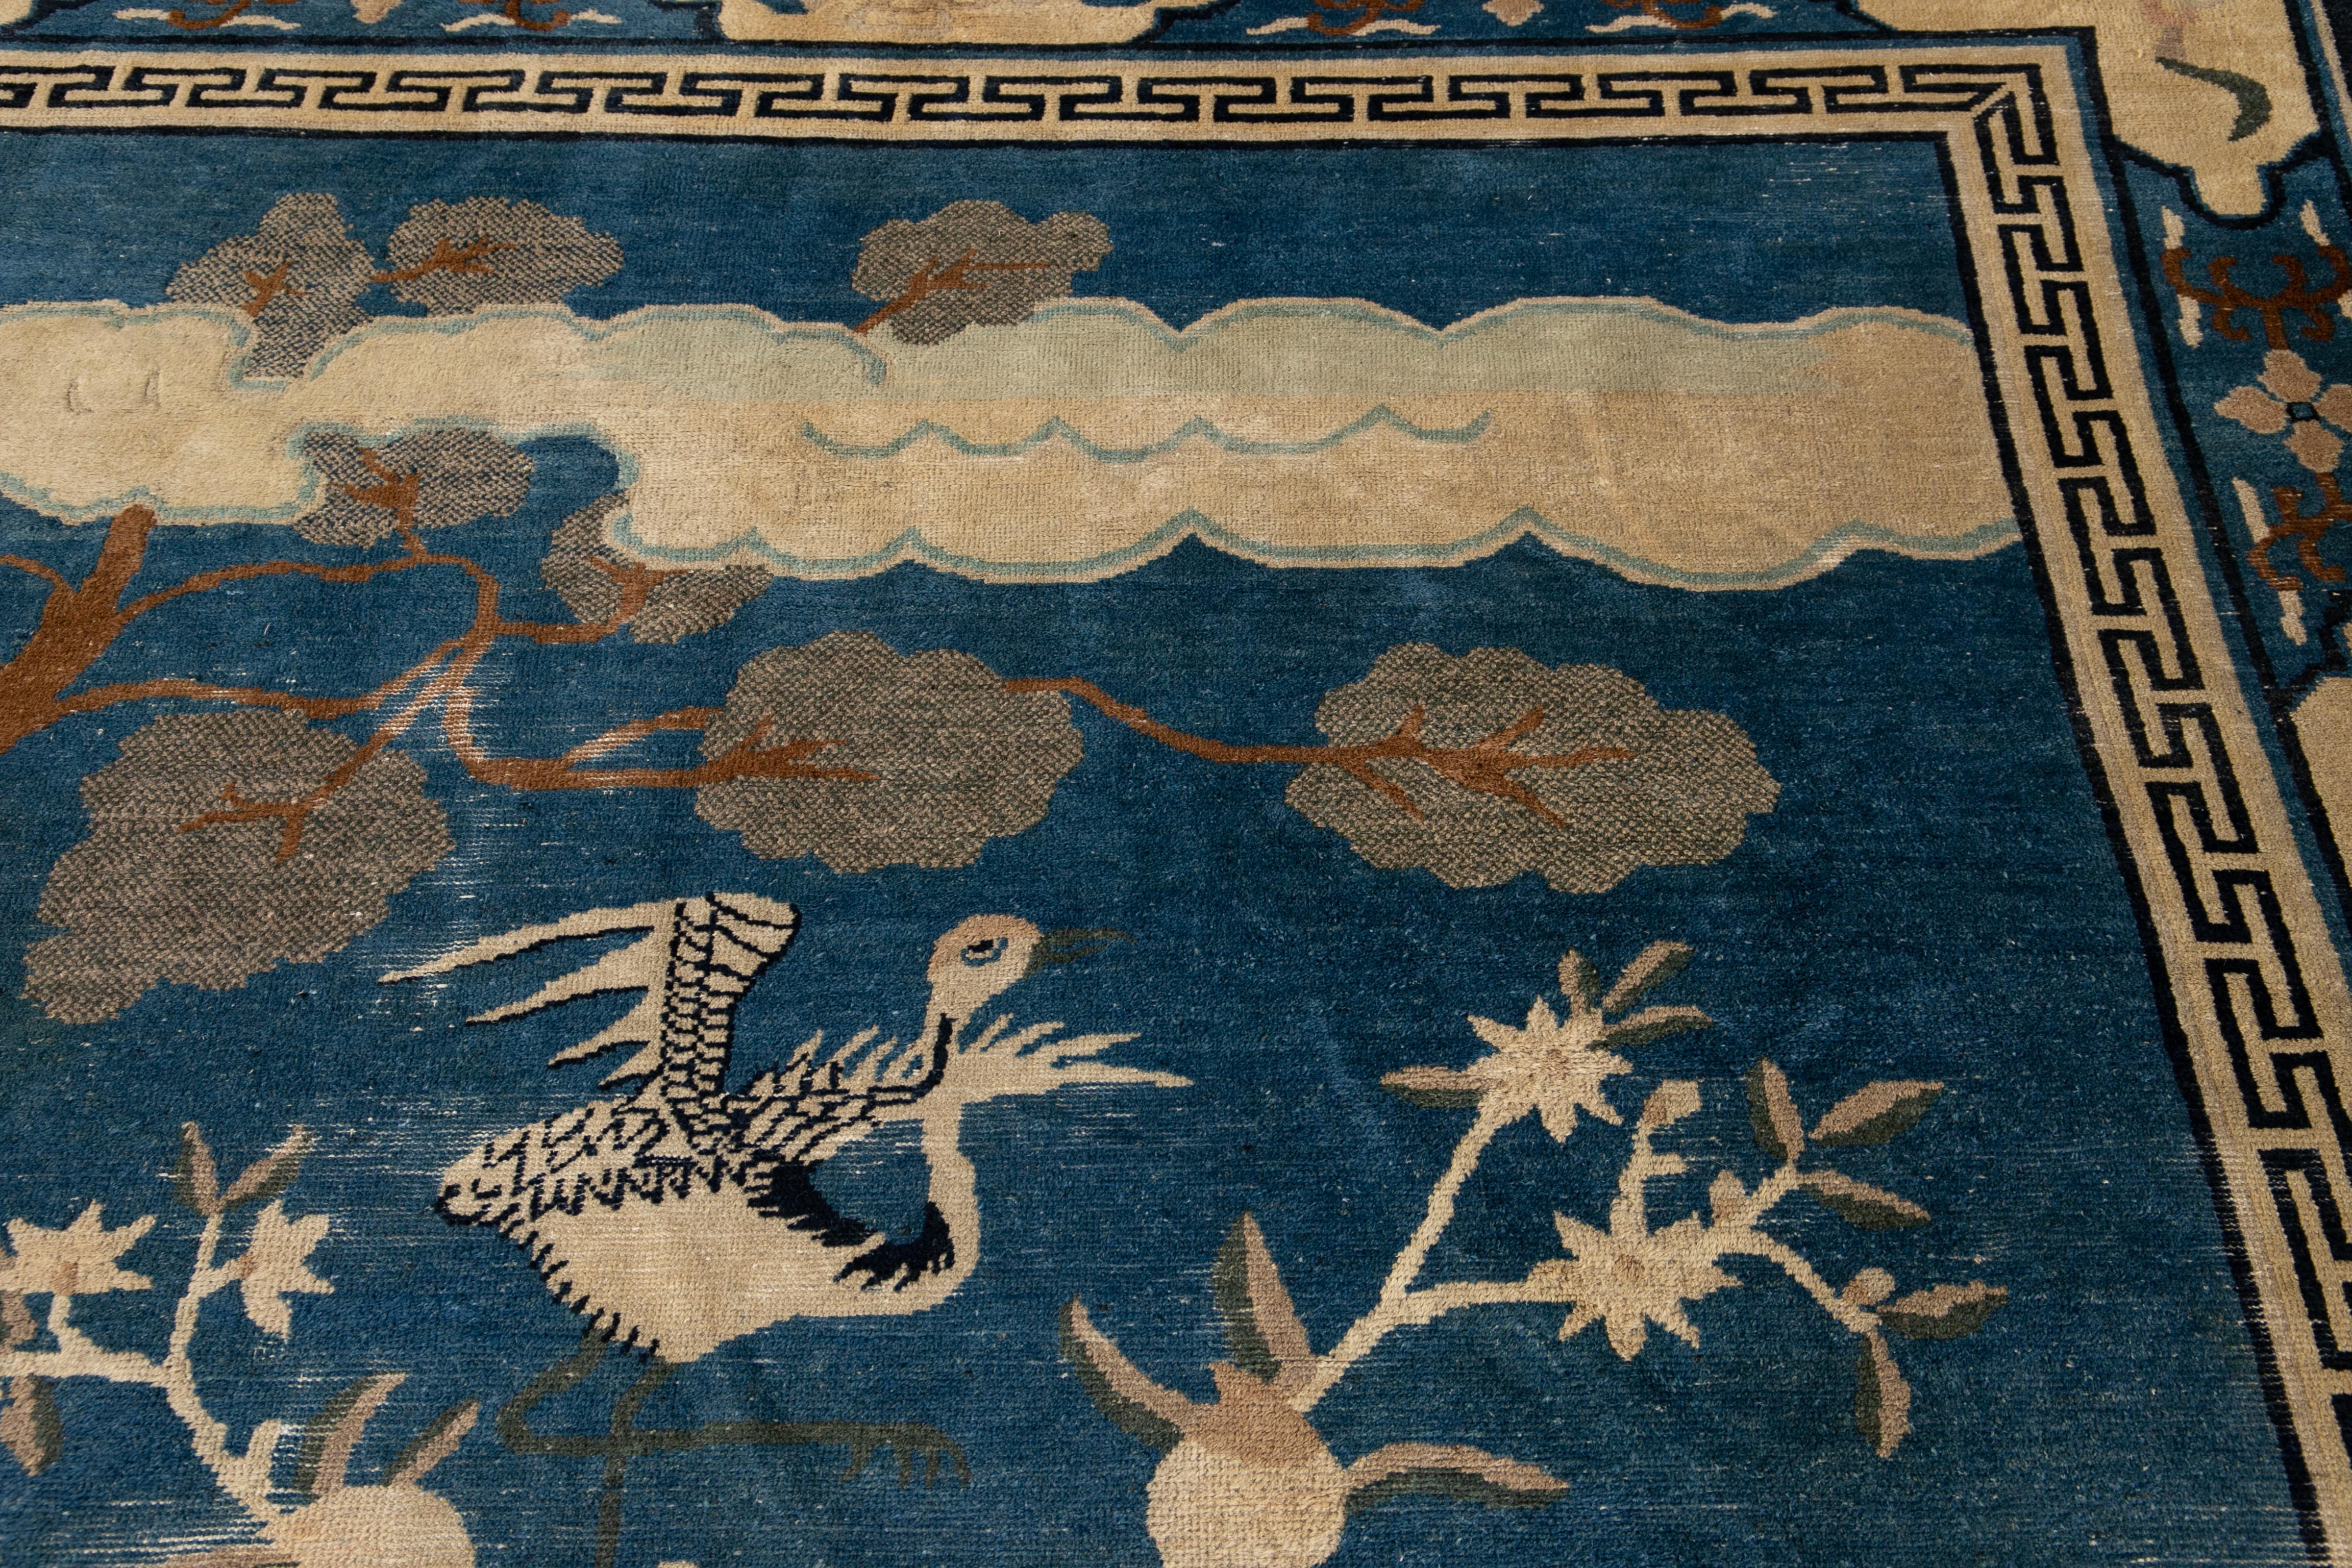 Antique Blue Chinese Peking Bird Design Wool Rug 7 Ft 8 In X 9 Ft 5 In. For Sale 7